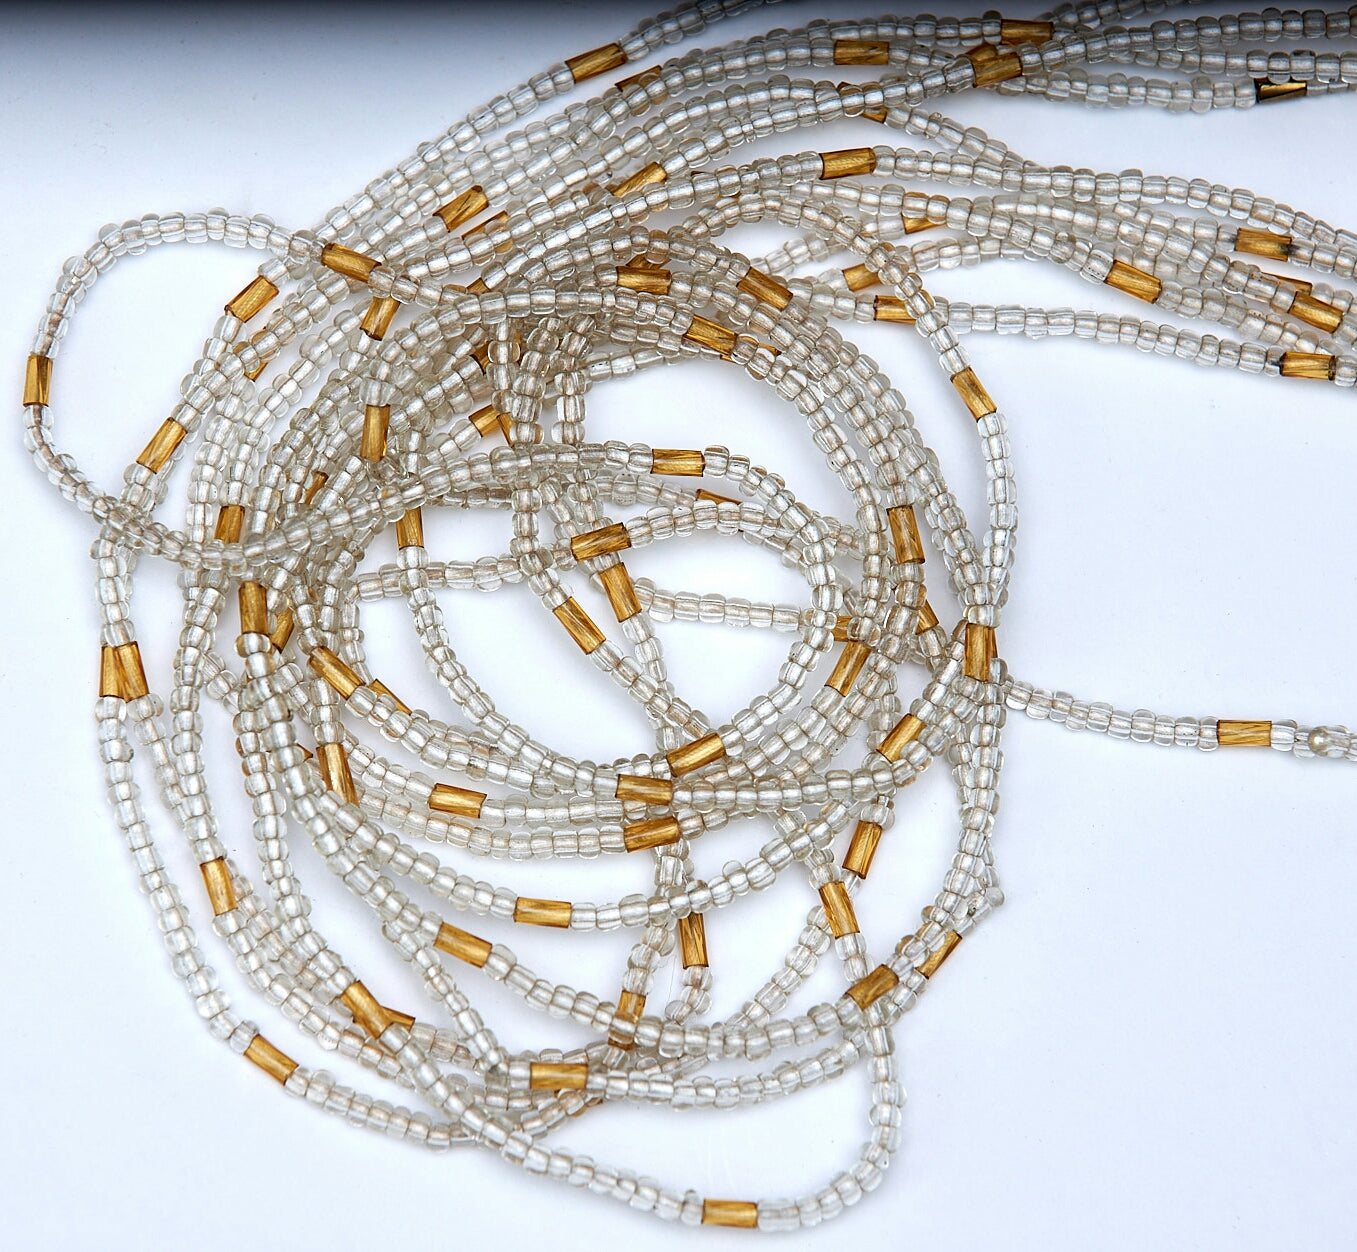 46 Inches Silver Glass Beads With Gold bars Tie on Waist Beads